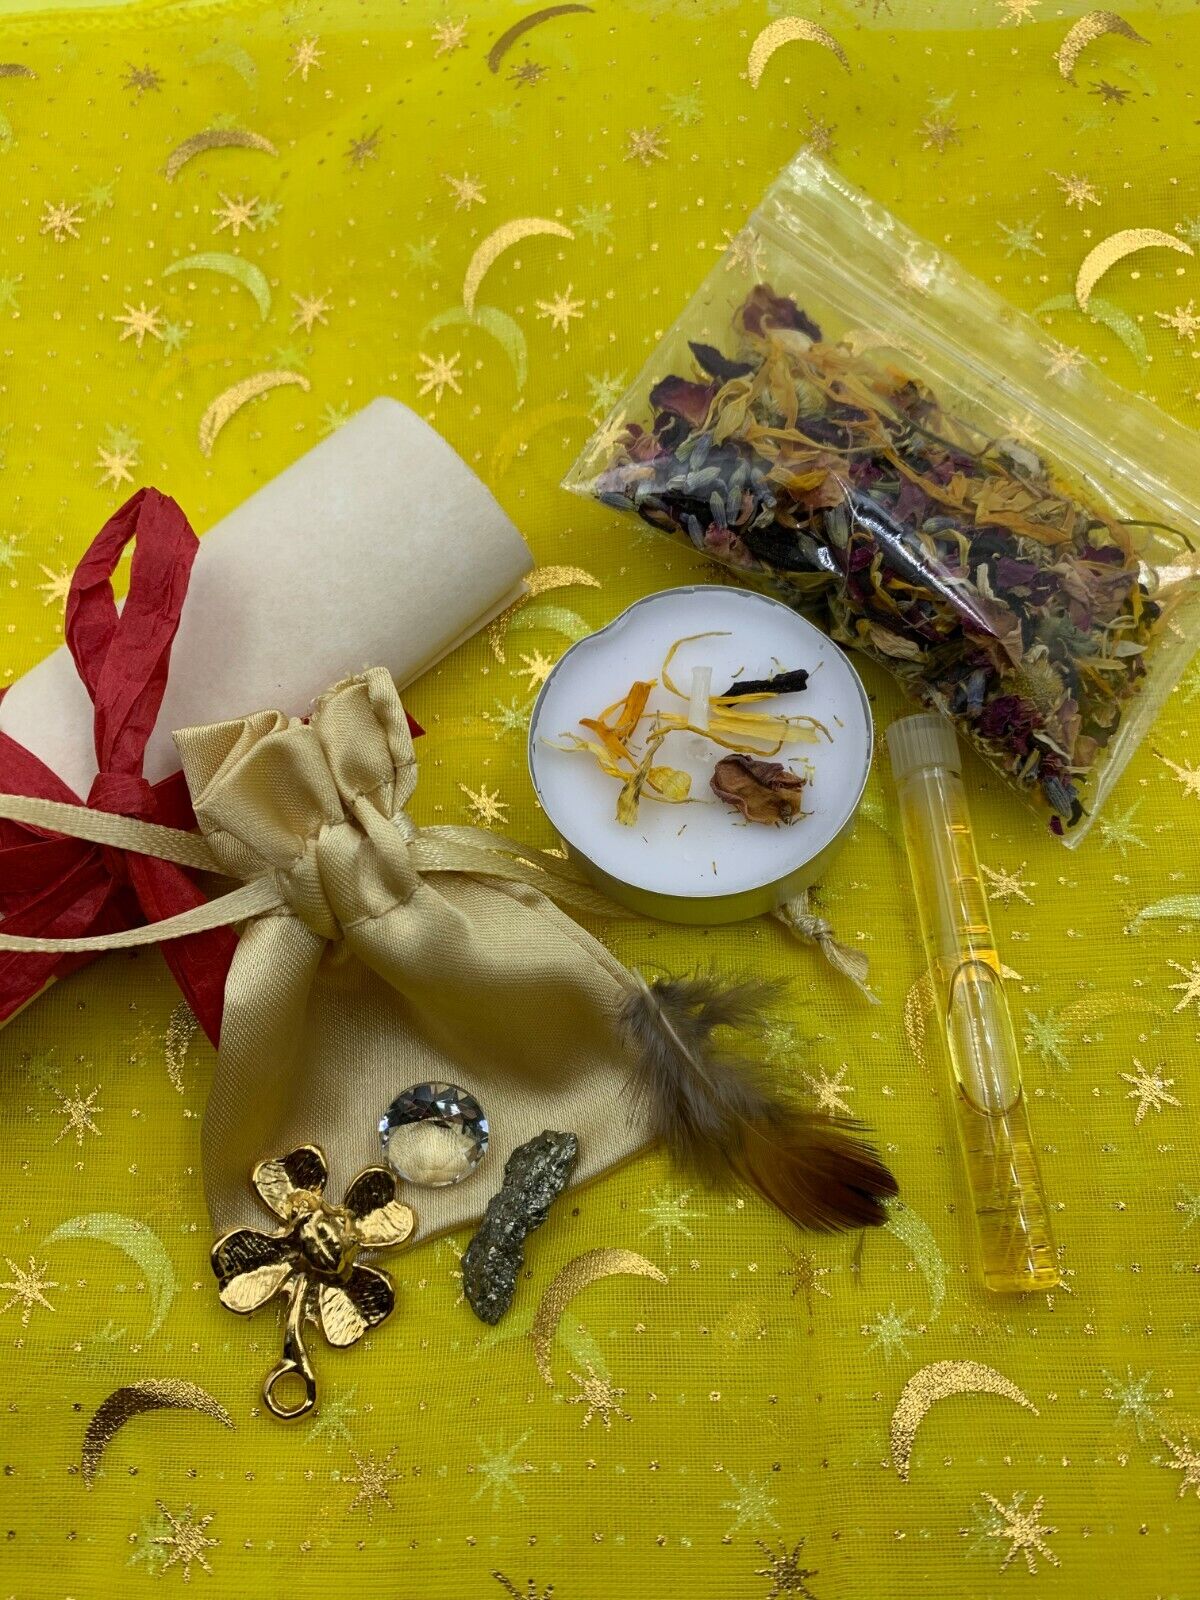 WISHING “GET WHAT YOU WANT” Old Witch Secret Gris-Gris Bag Best Spells Magick